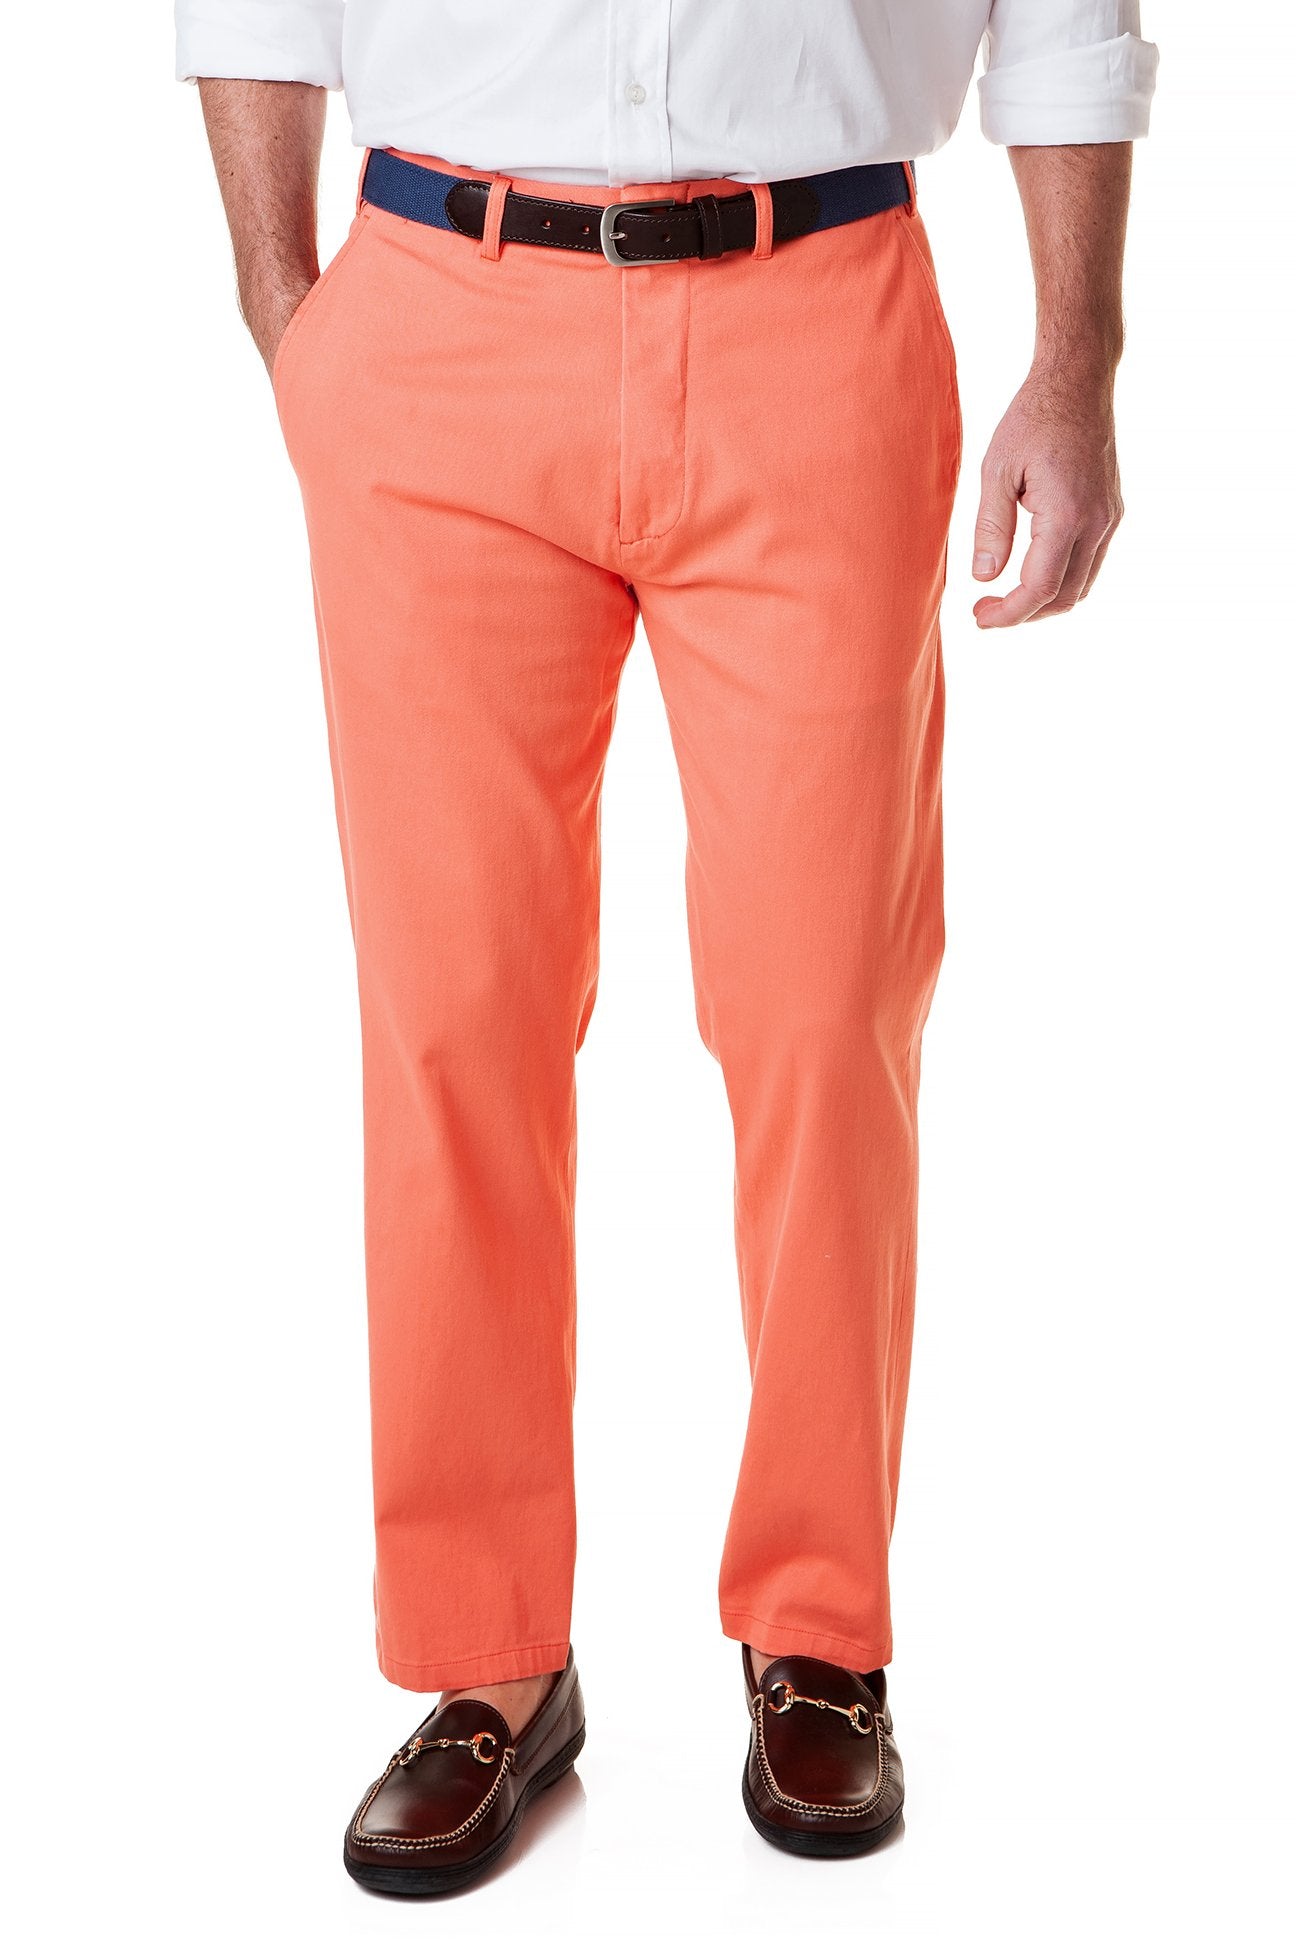 Harbor Pant Stretch Twill Coral